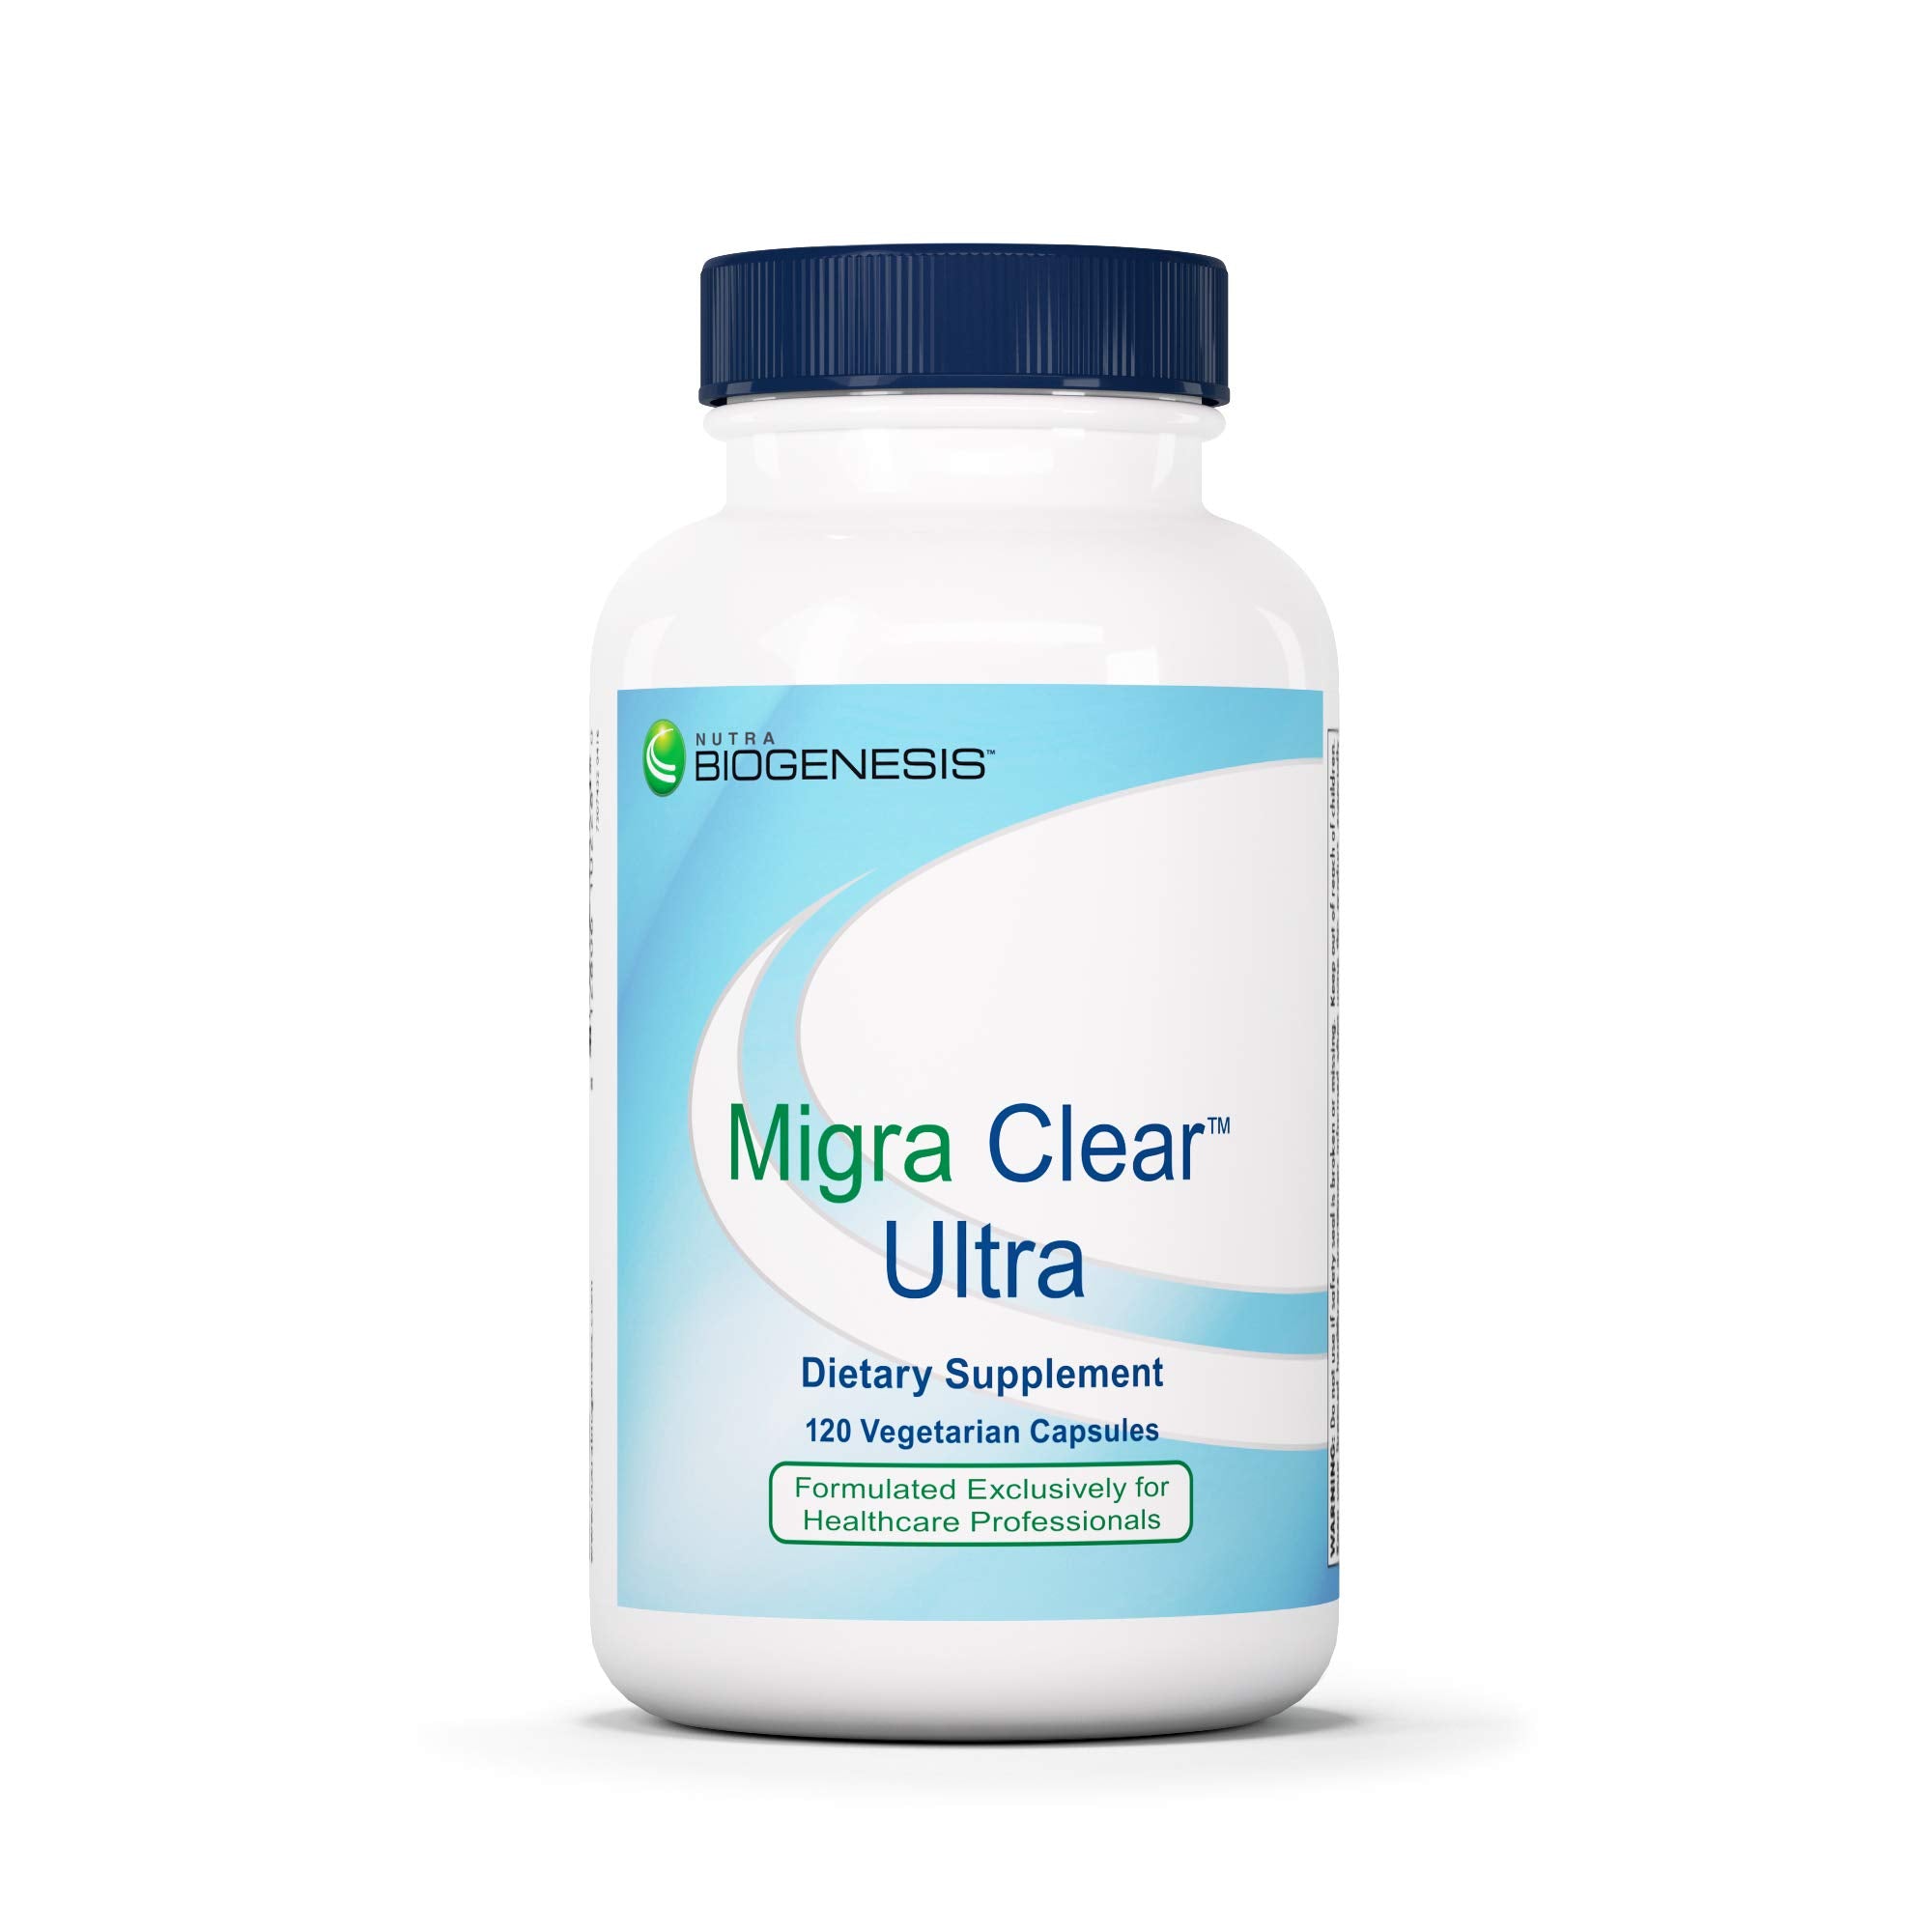 Nutra BioGenesis Store Migra Clear Ultra - Feverfew, Riboflavin And Magnesium To Help Support Healthy Capillary Function And Cytokine Activity - 120 Capsules